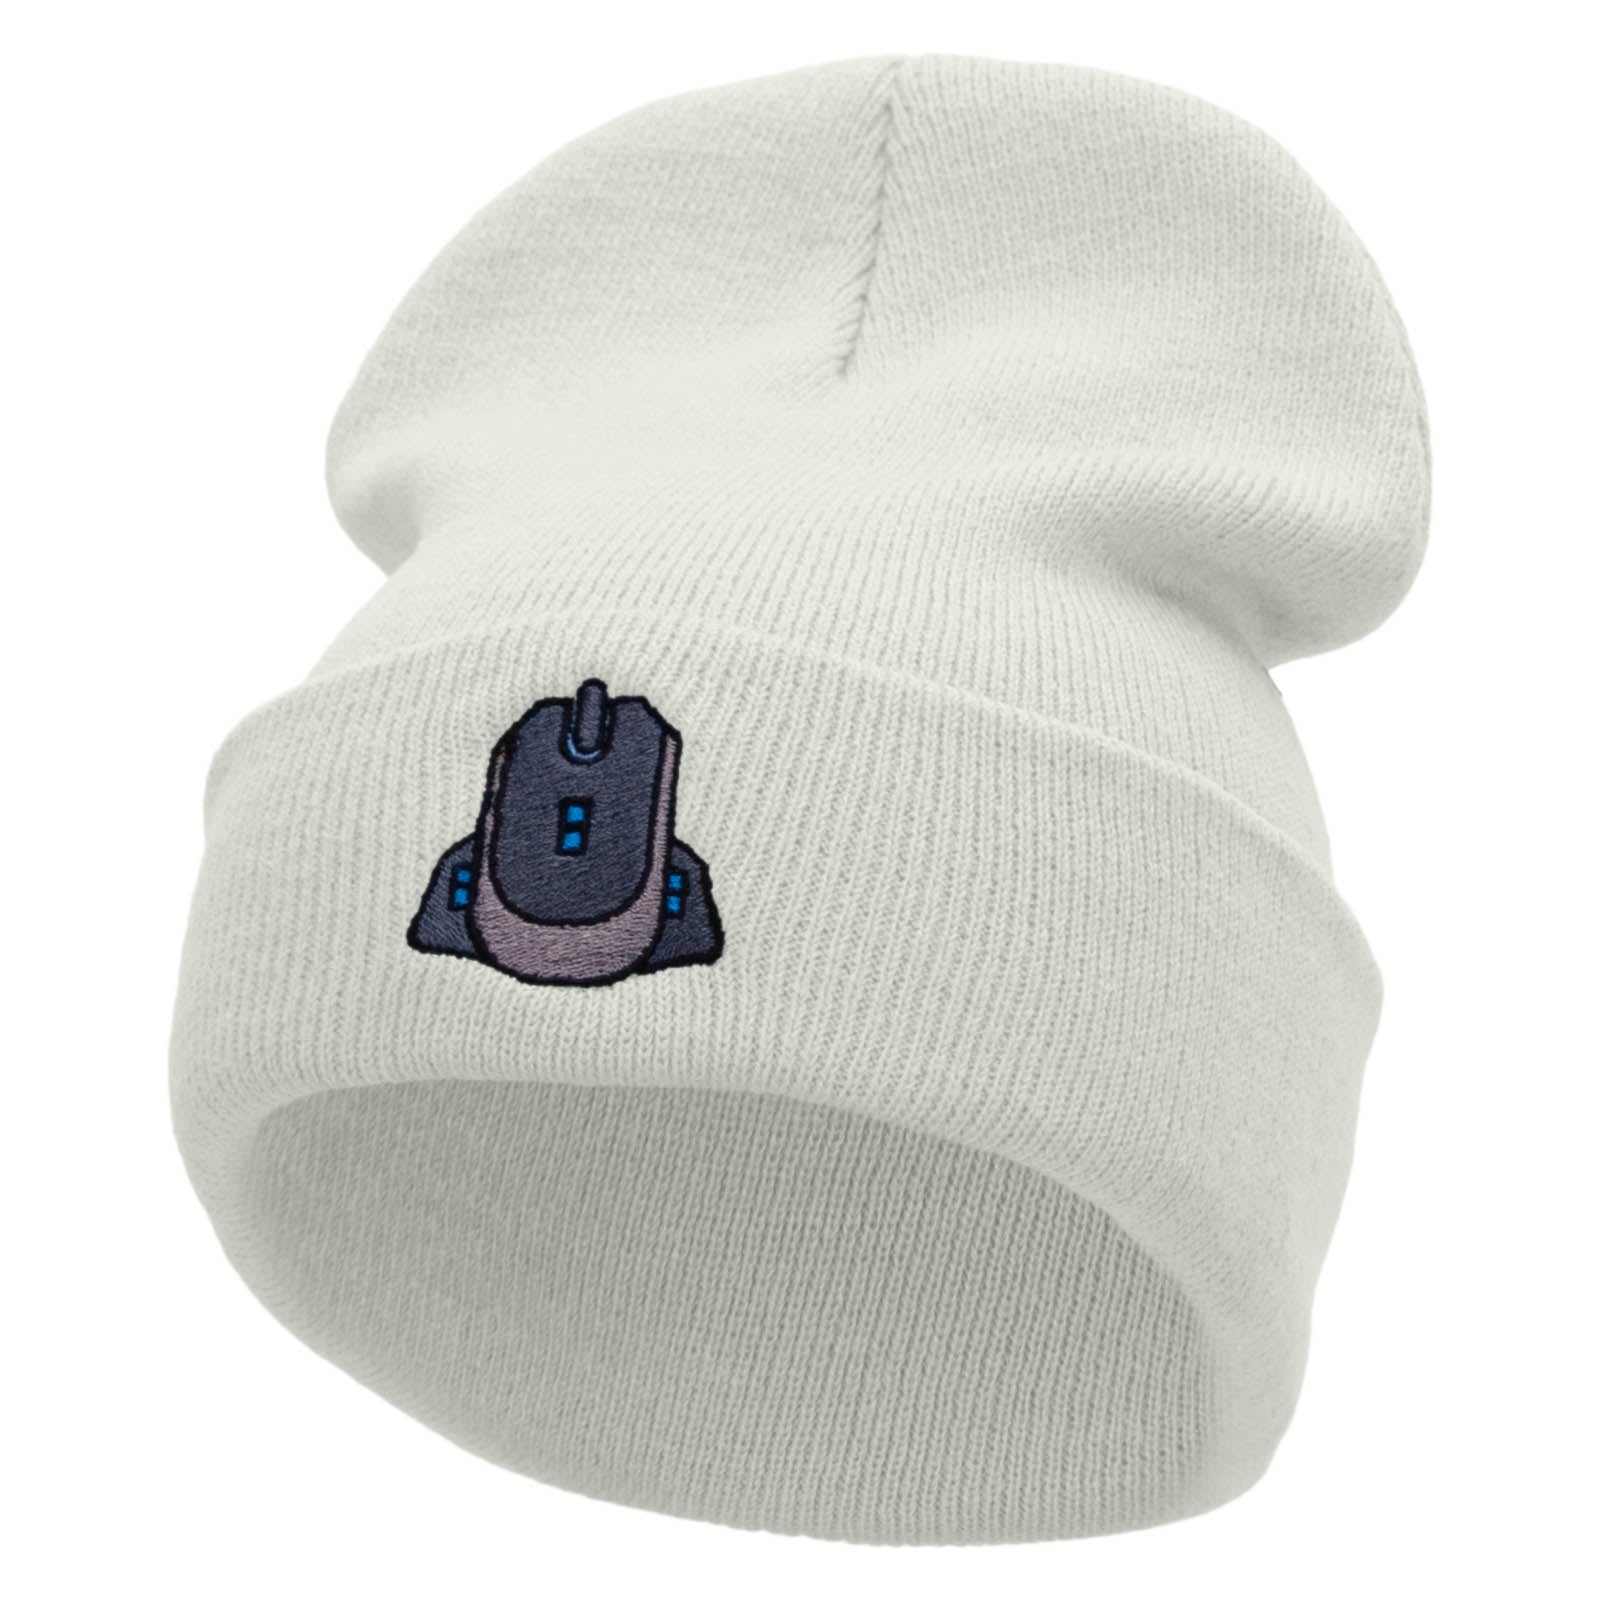 Gamer Mouse Embroidered 12 Inch Long Knitted Beanie - White OSFM